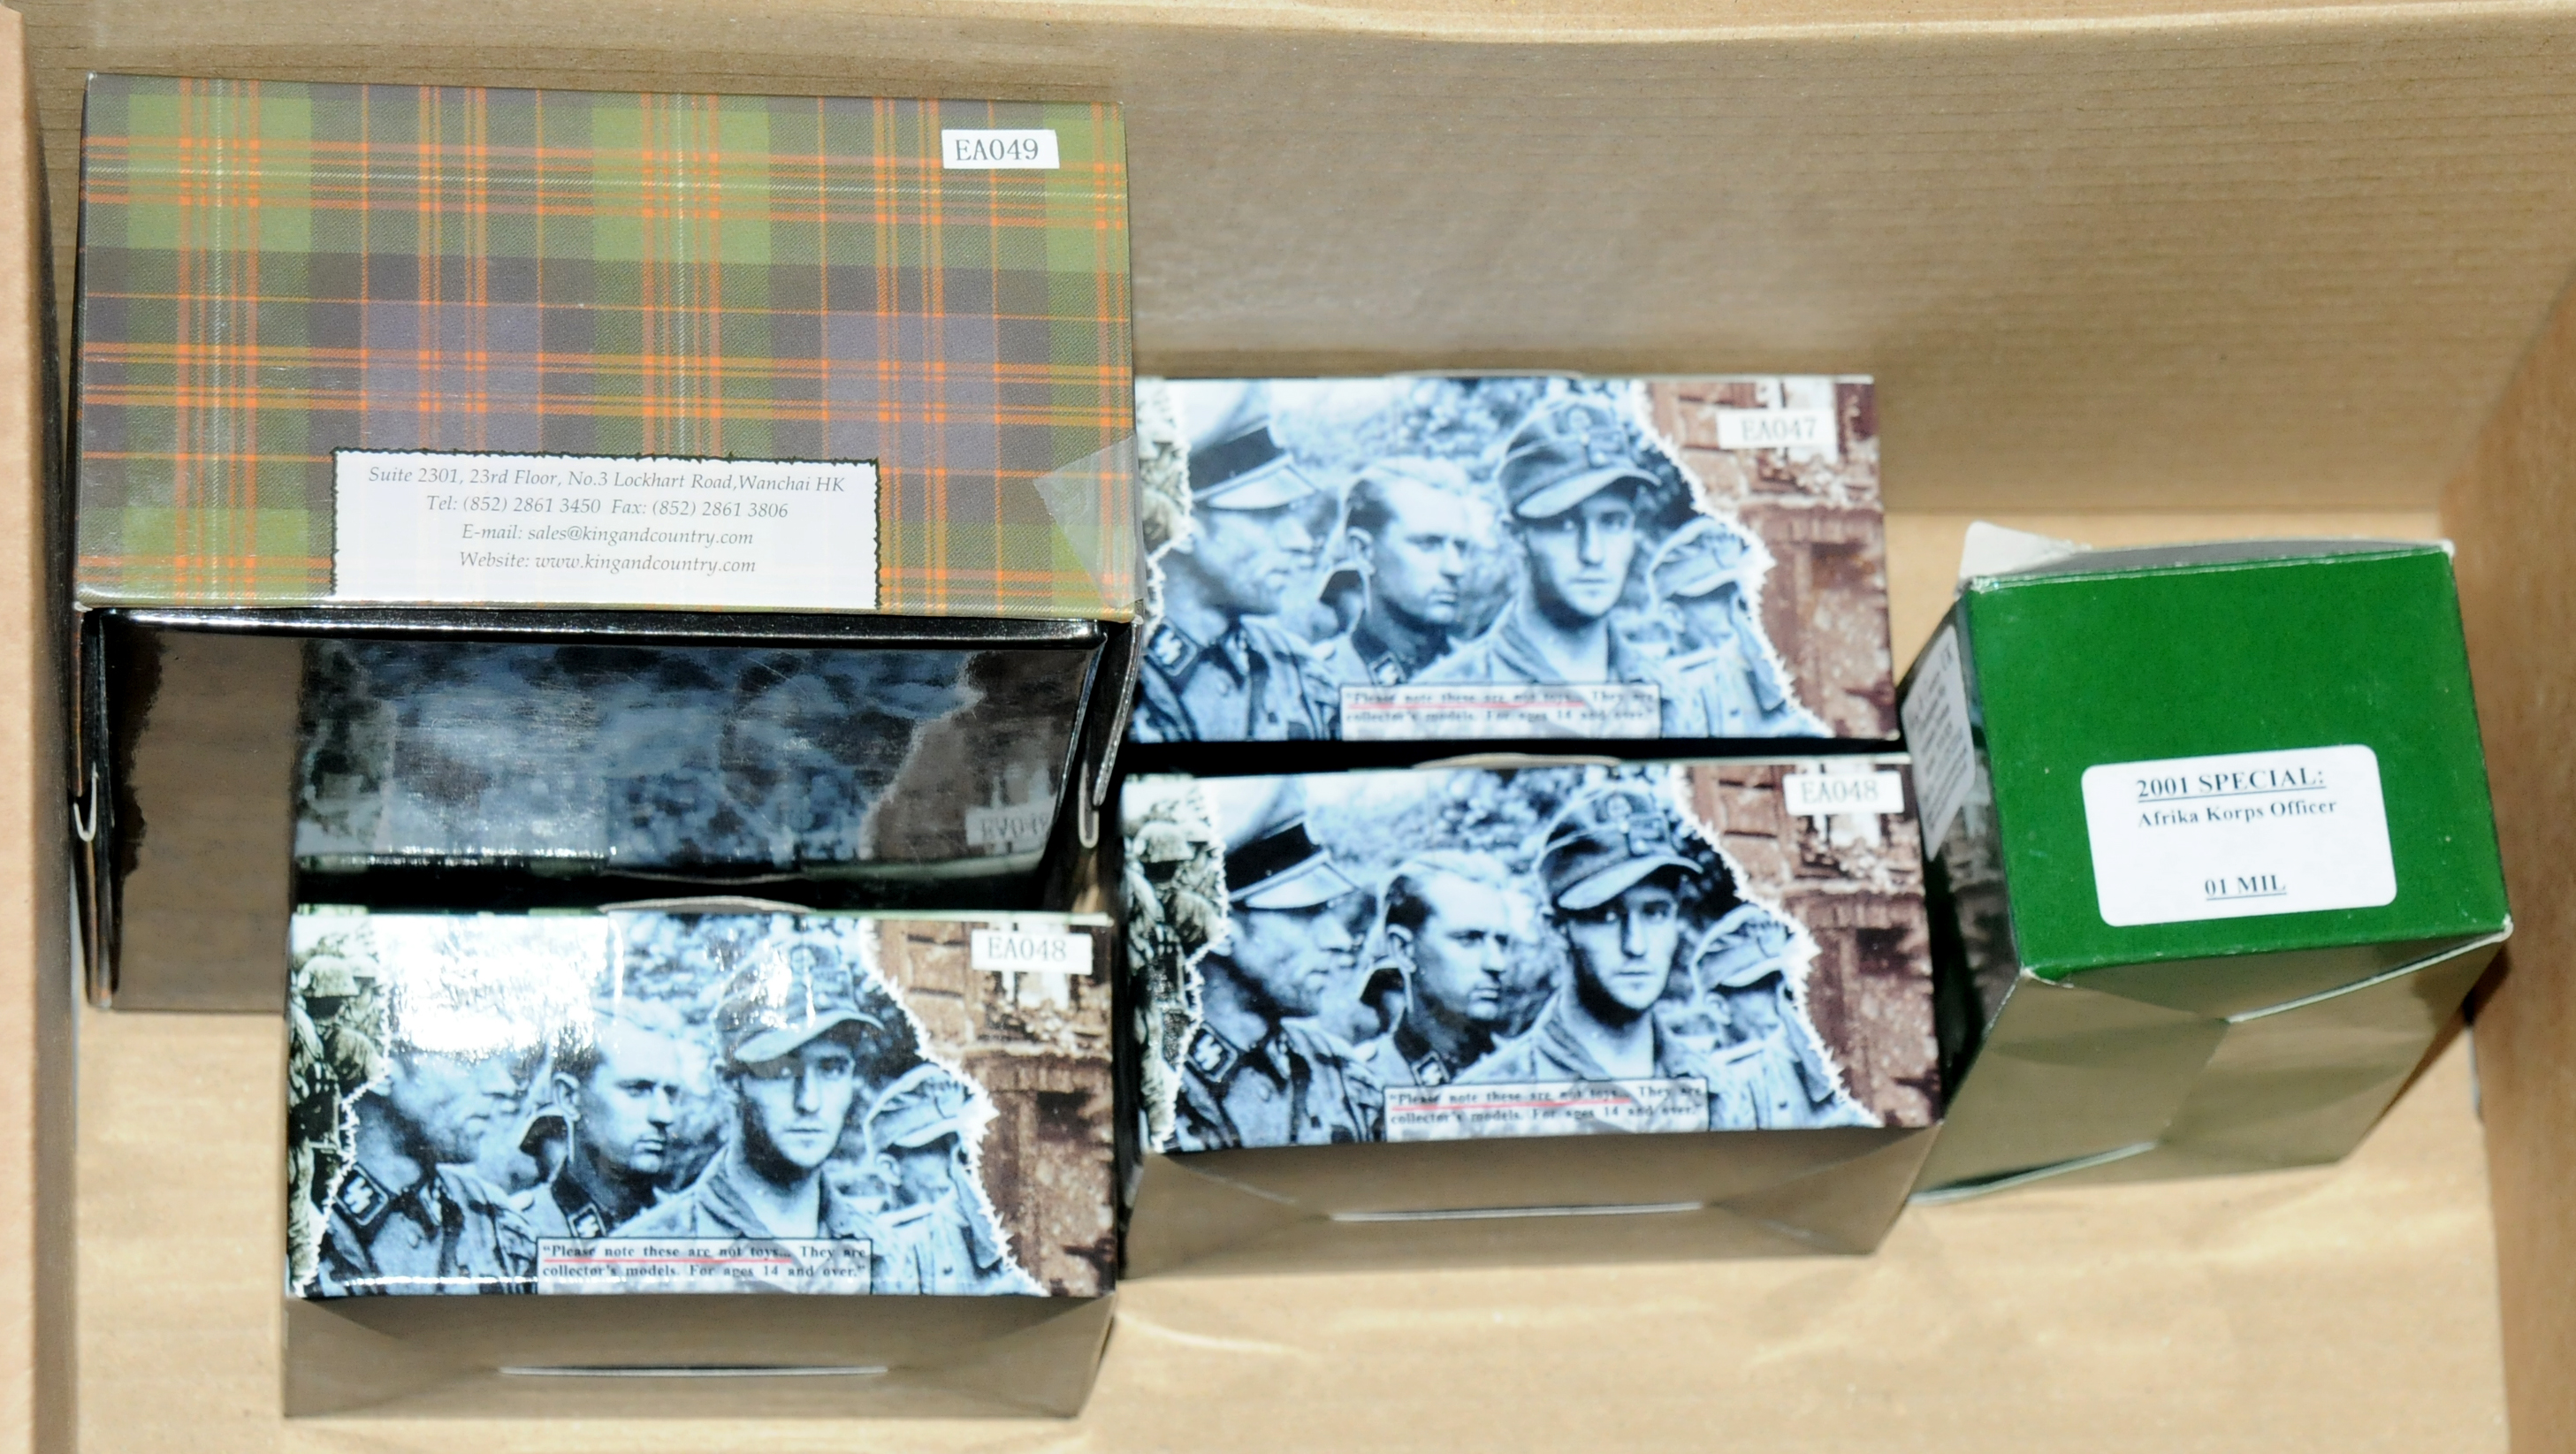 King & Country - Eighth Army & 2001 Special Figurine Sets - Image 2 of 2